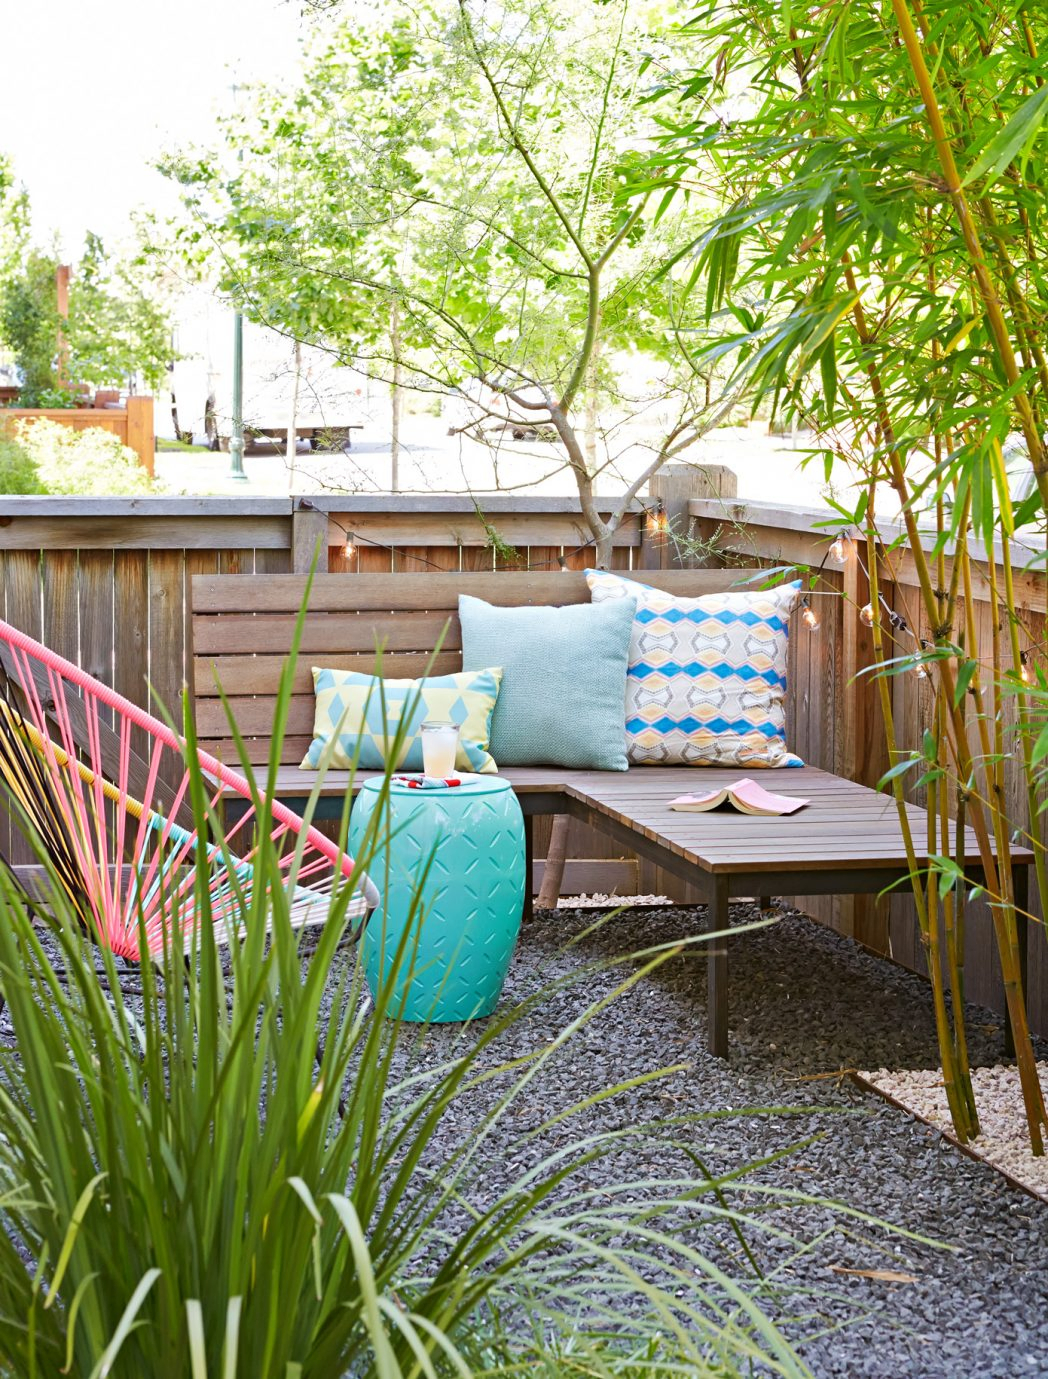 backyard ideas makeover on a budget patio seating bamboo 102605130 in cheap backyard makeover ideas